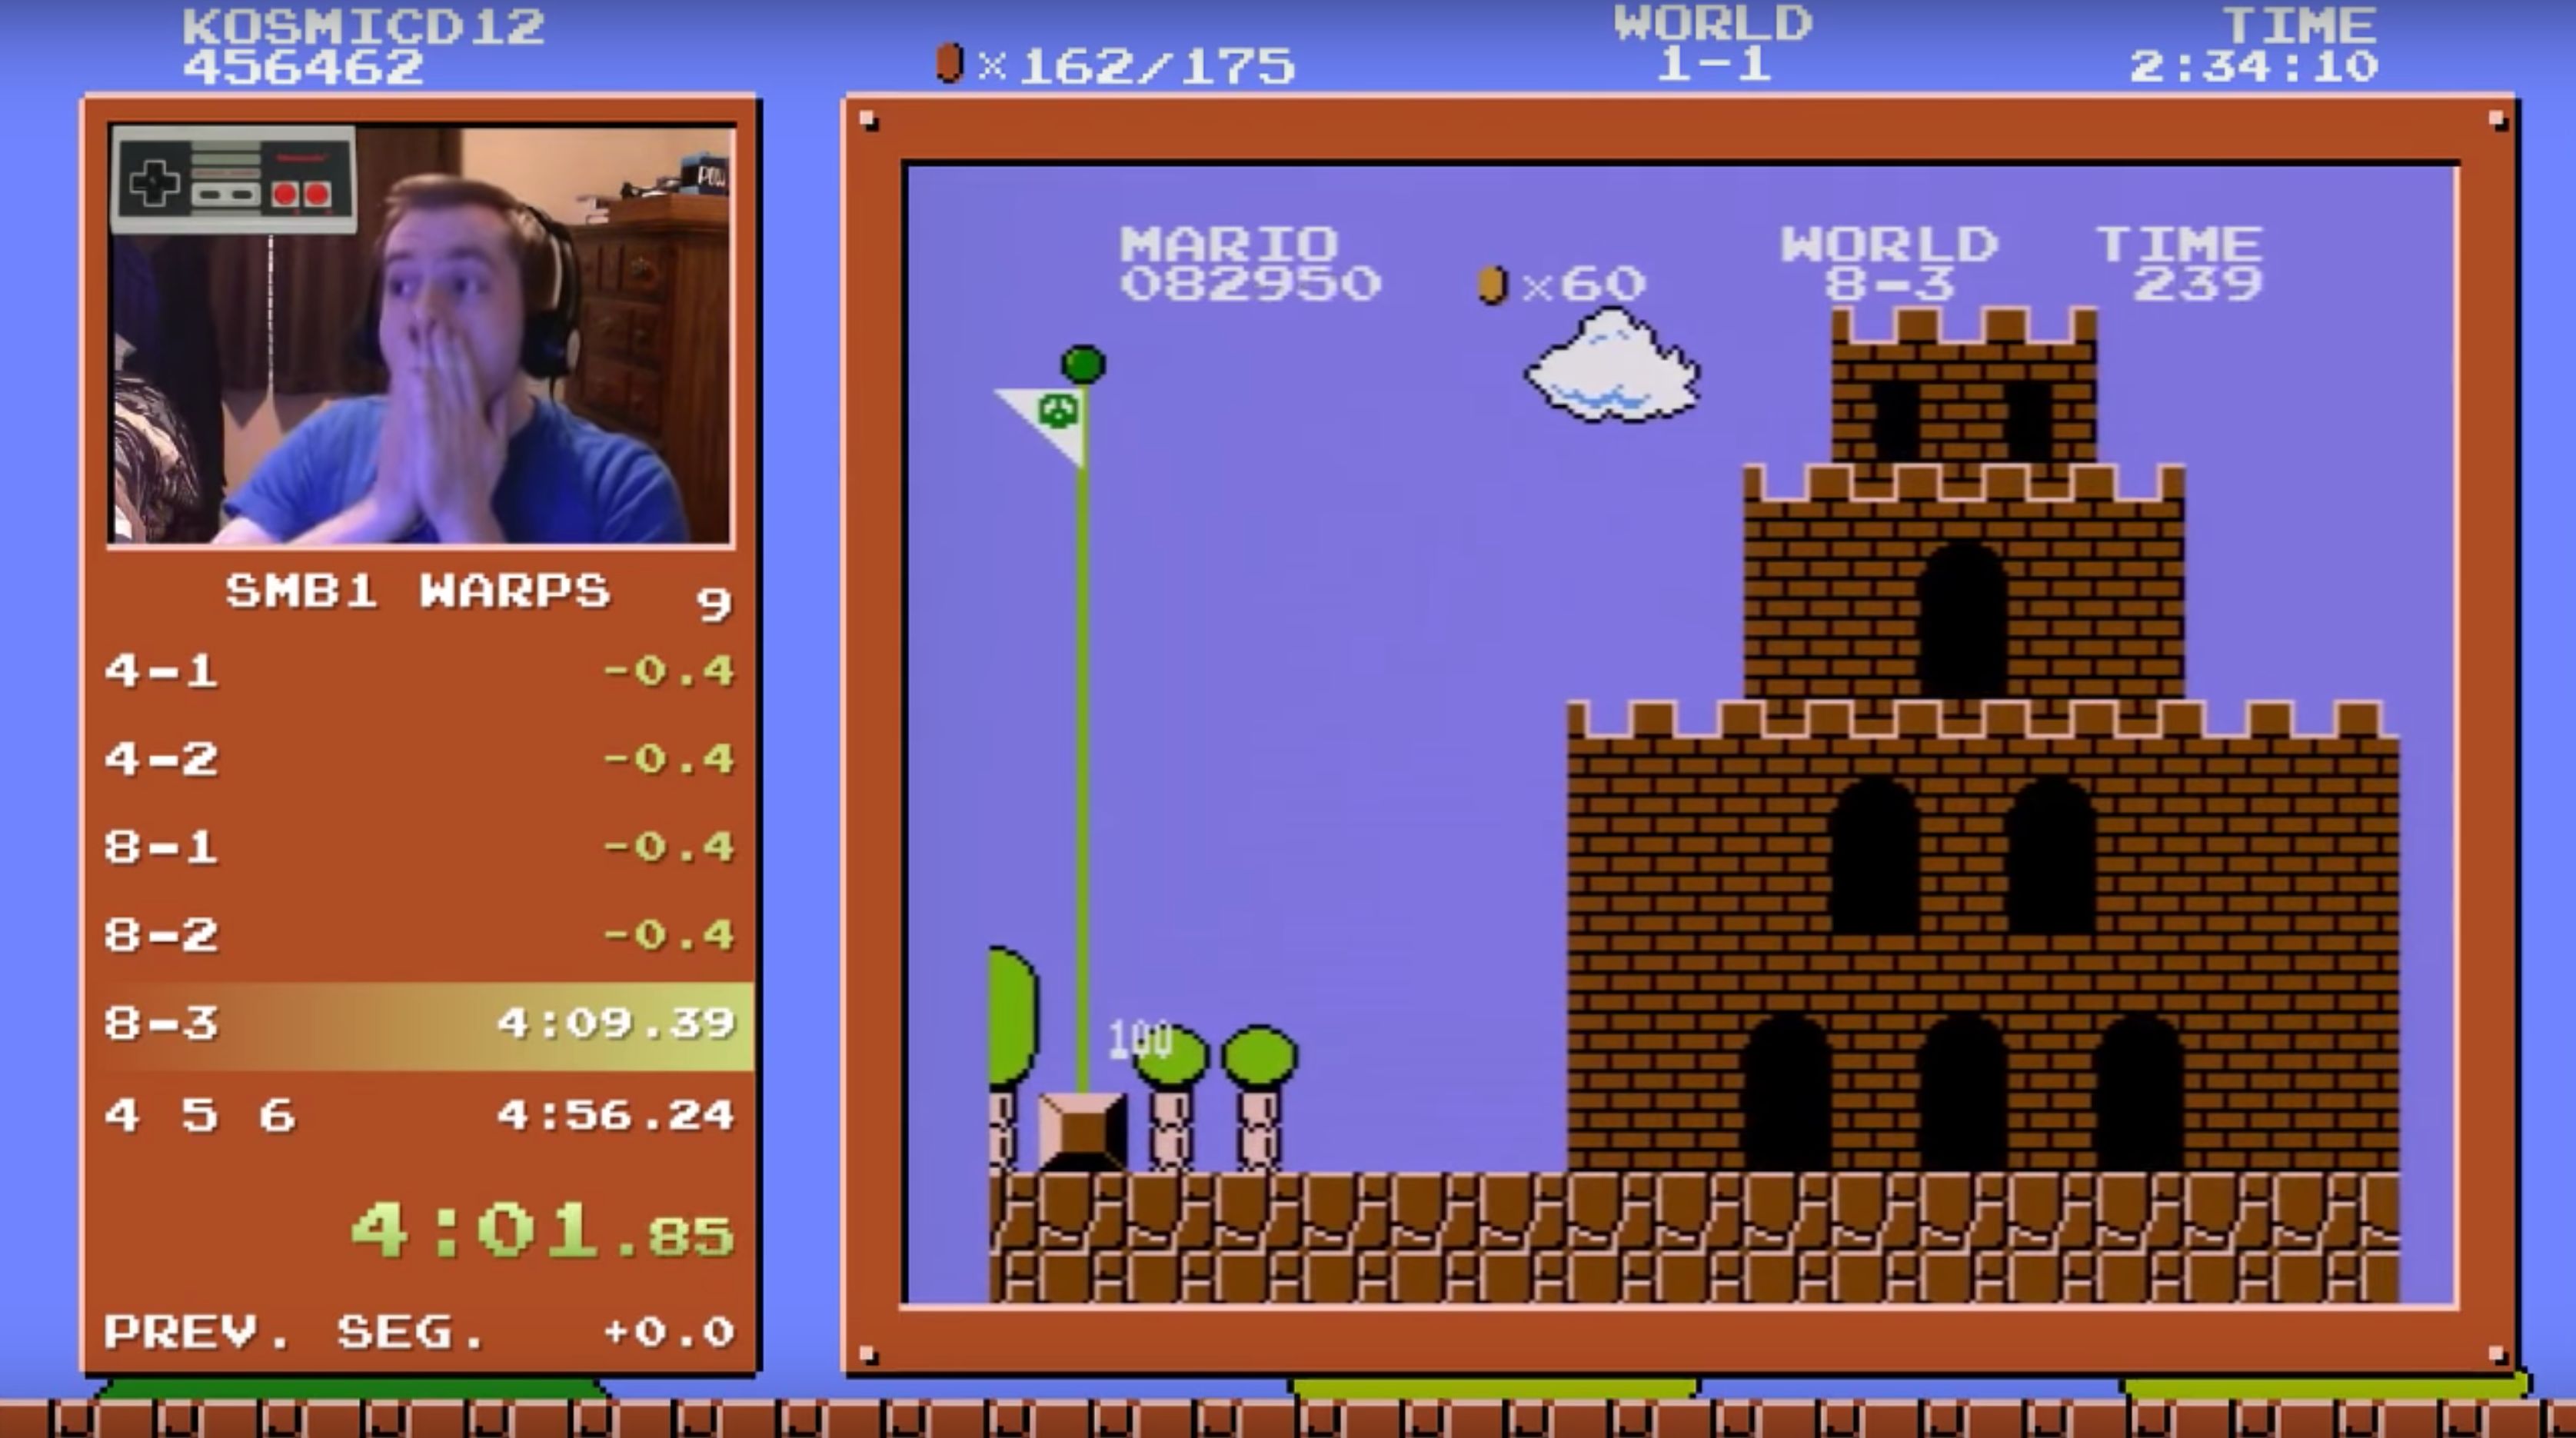 what is th world record for super mario bros.